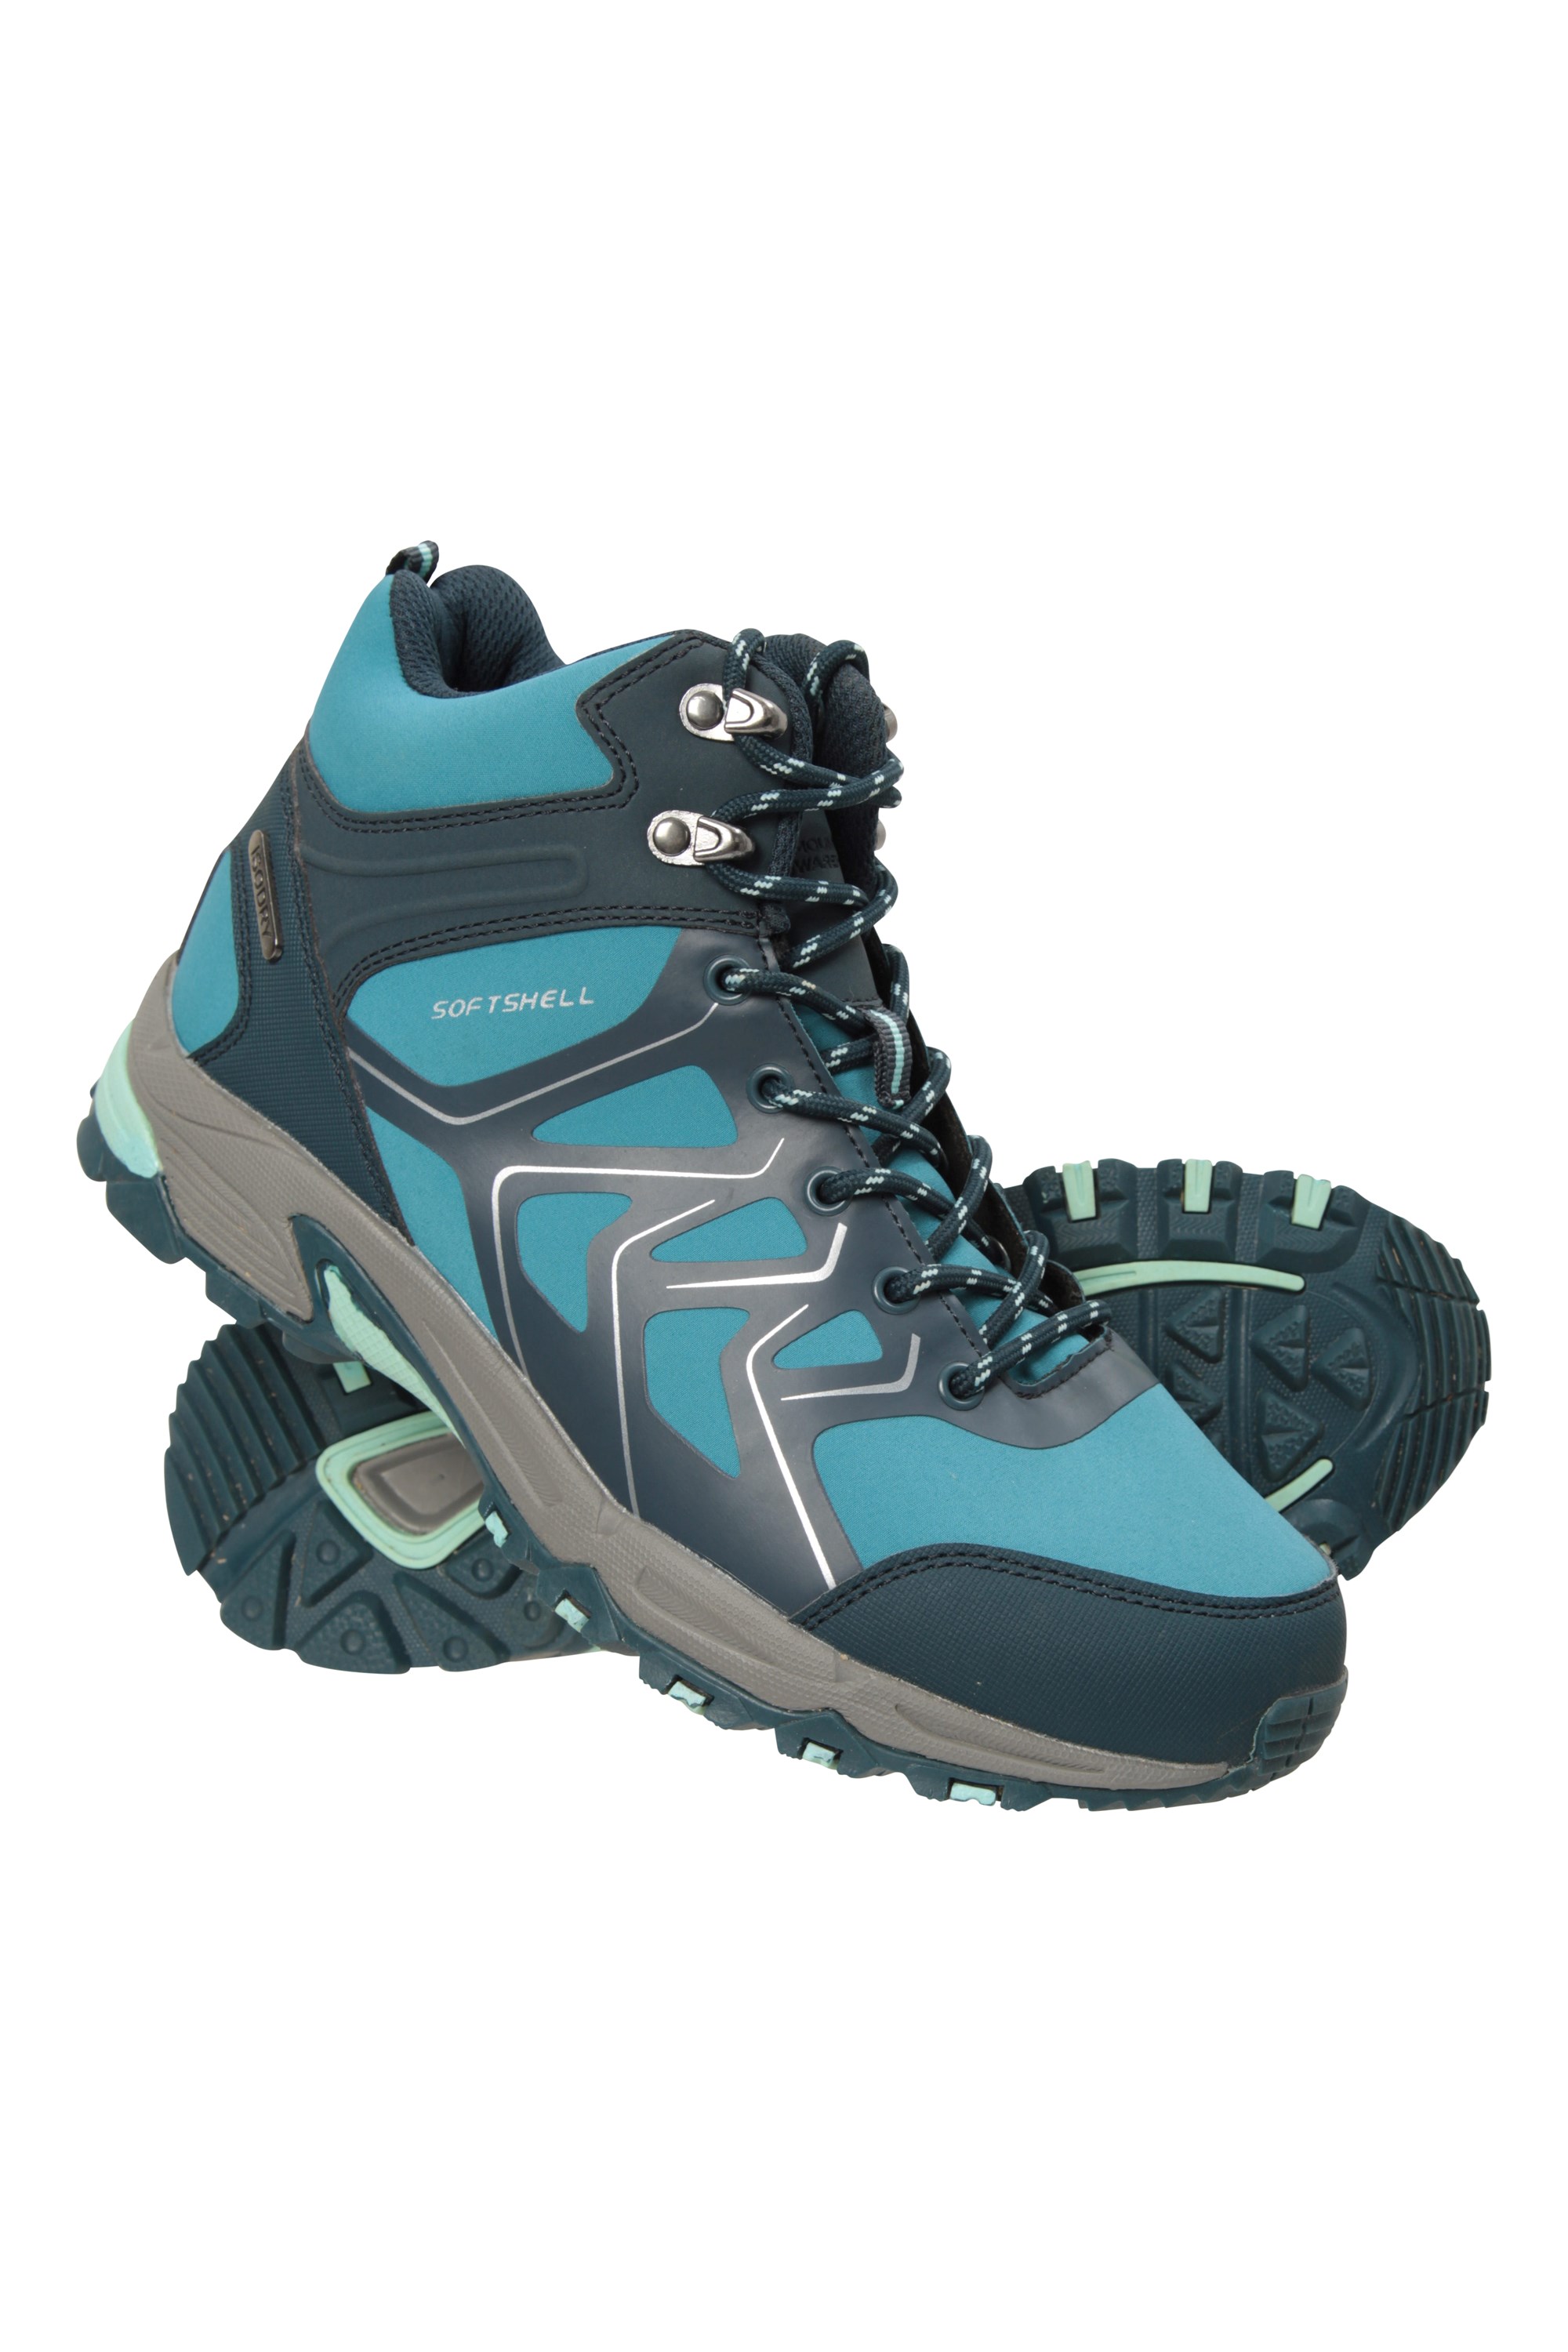 Ladies Shoes Mountain Warehouse Rapid Womens Waterproof Hiking Boots